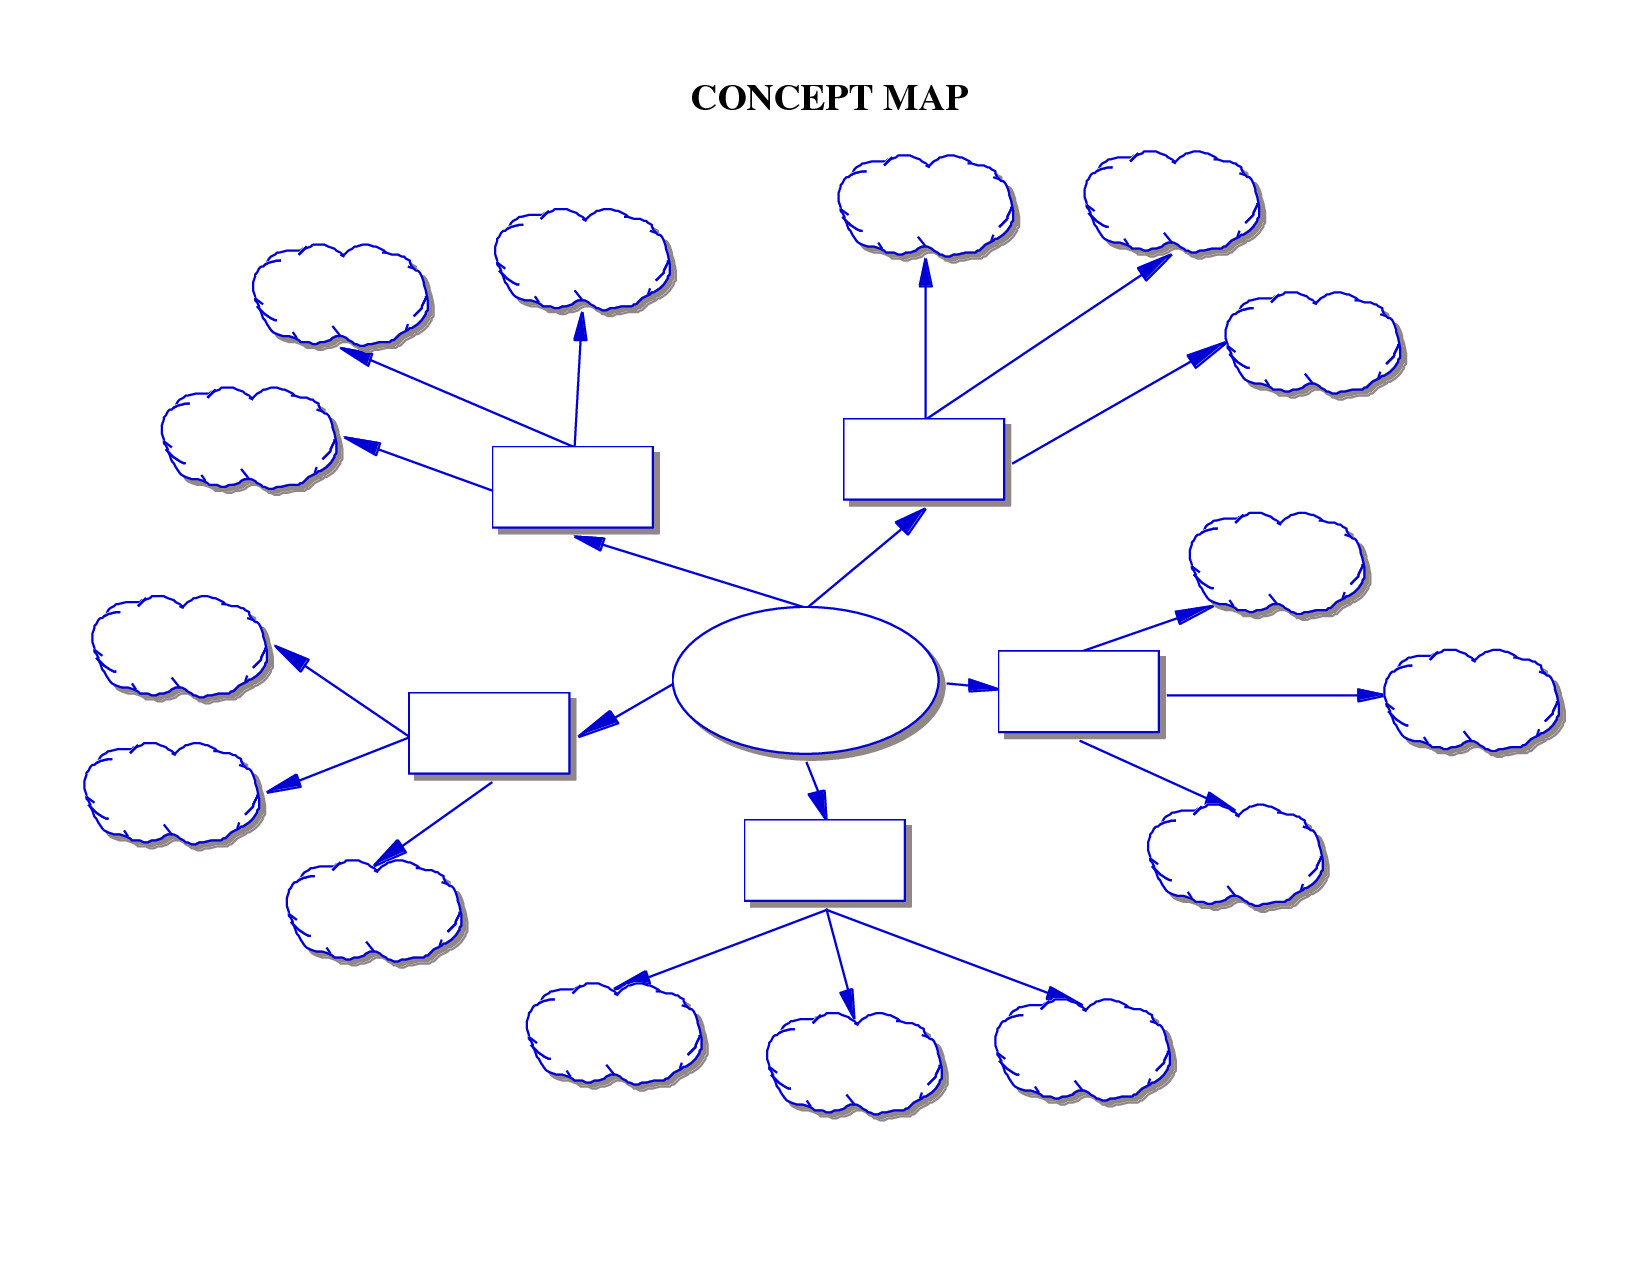 Concept Map Template Word A Concept Map Can Be Of Great Help to Teachers In Planning